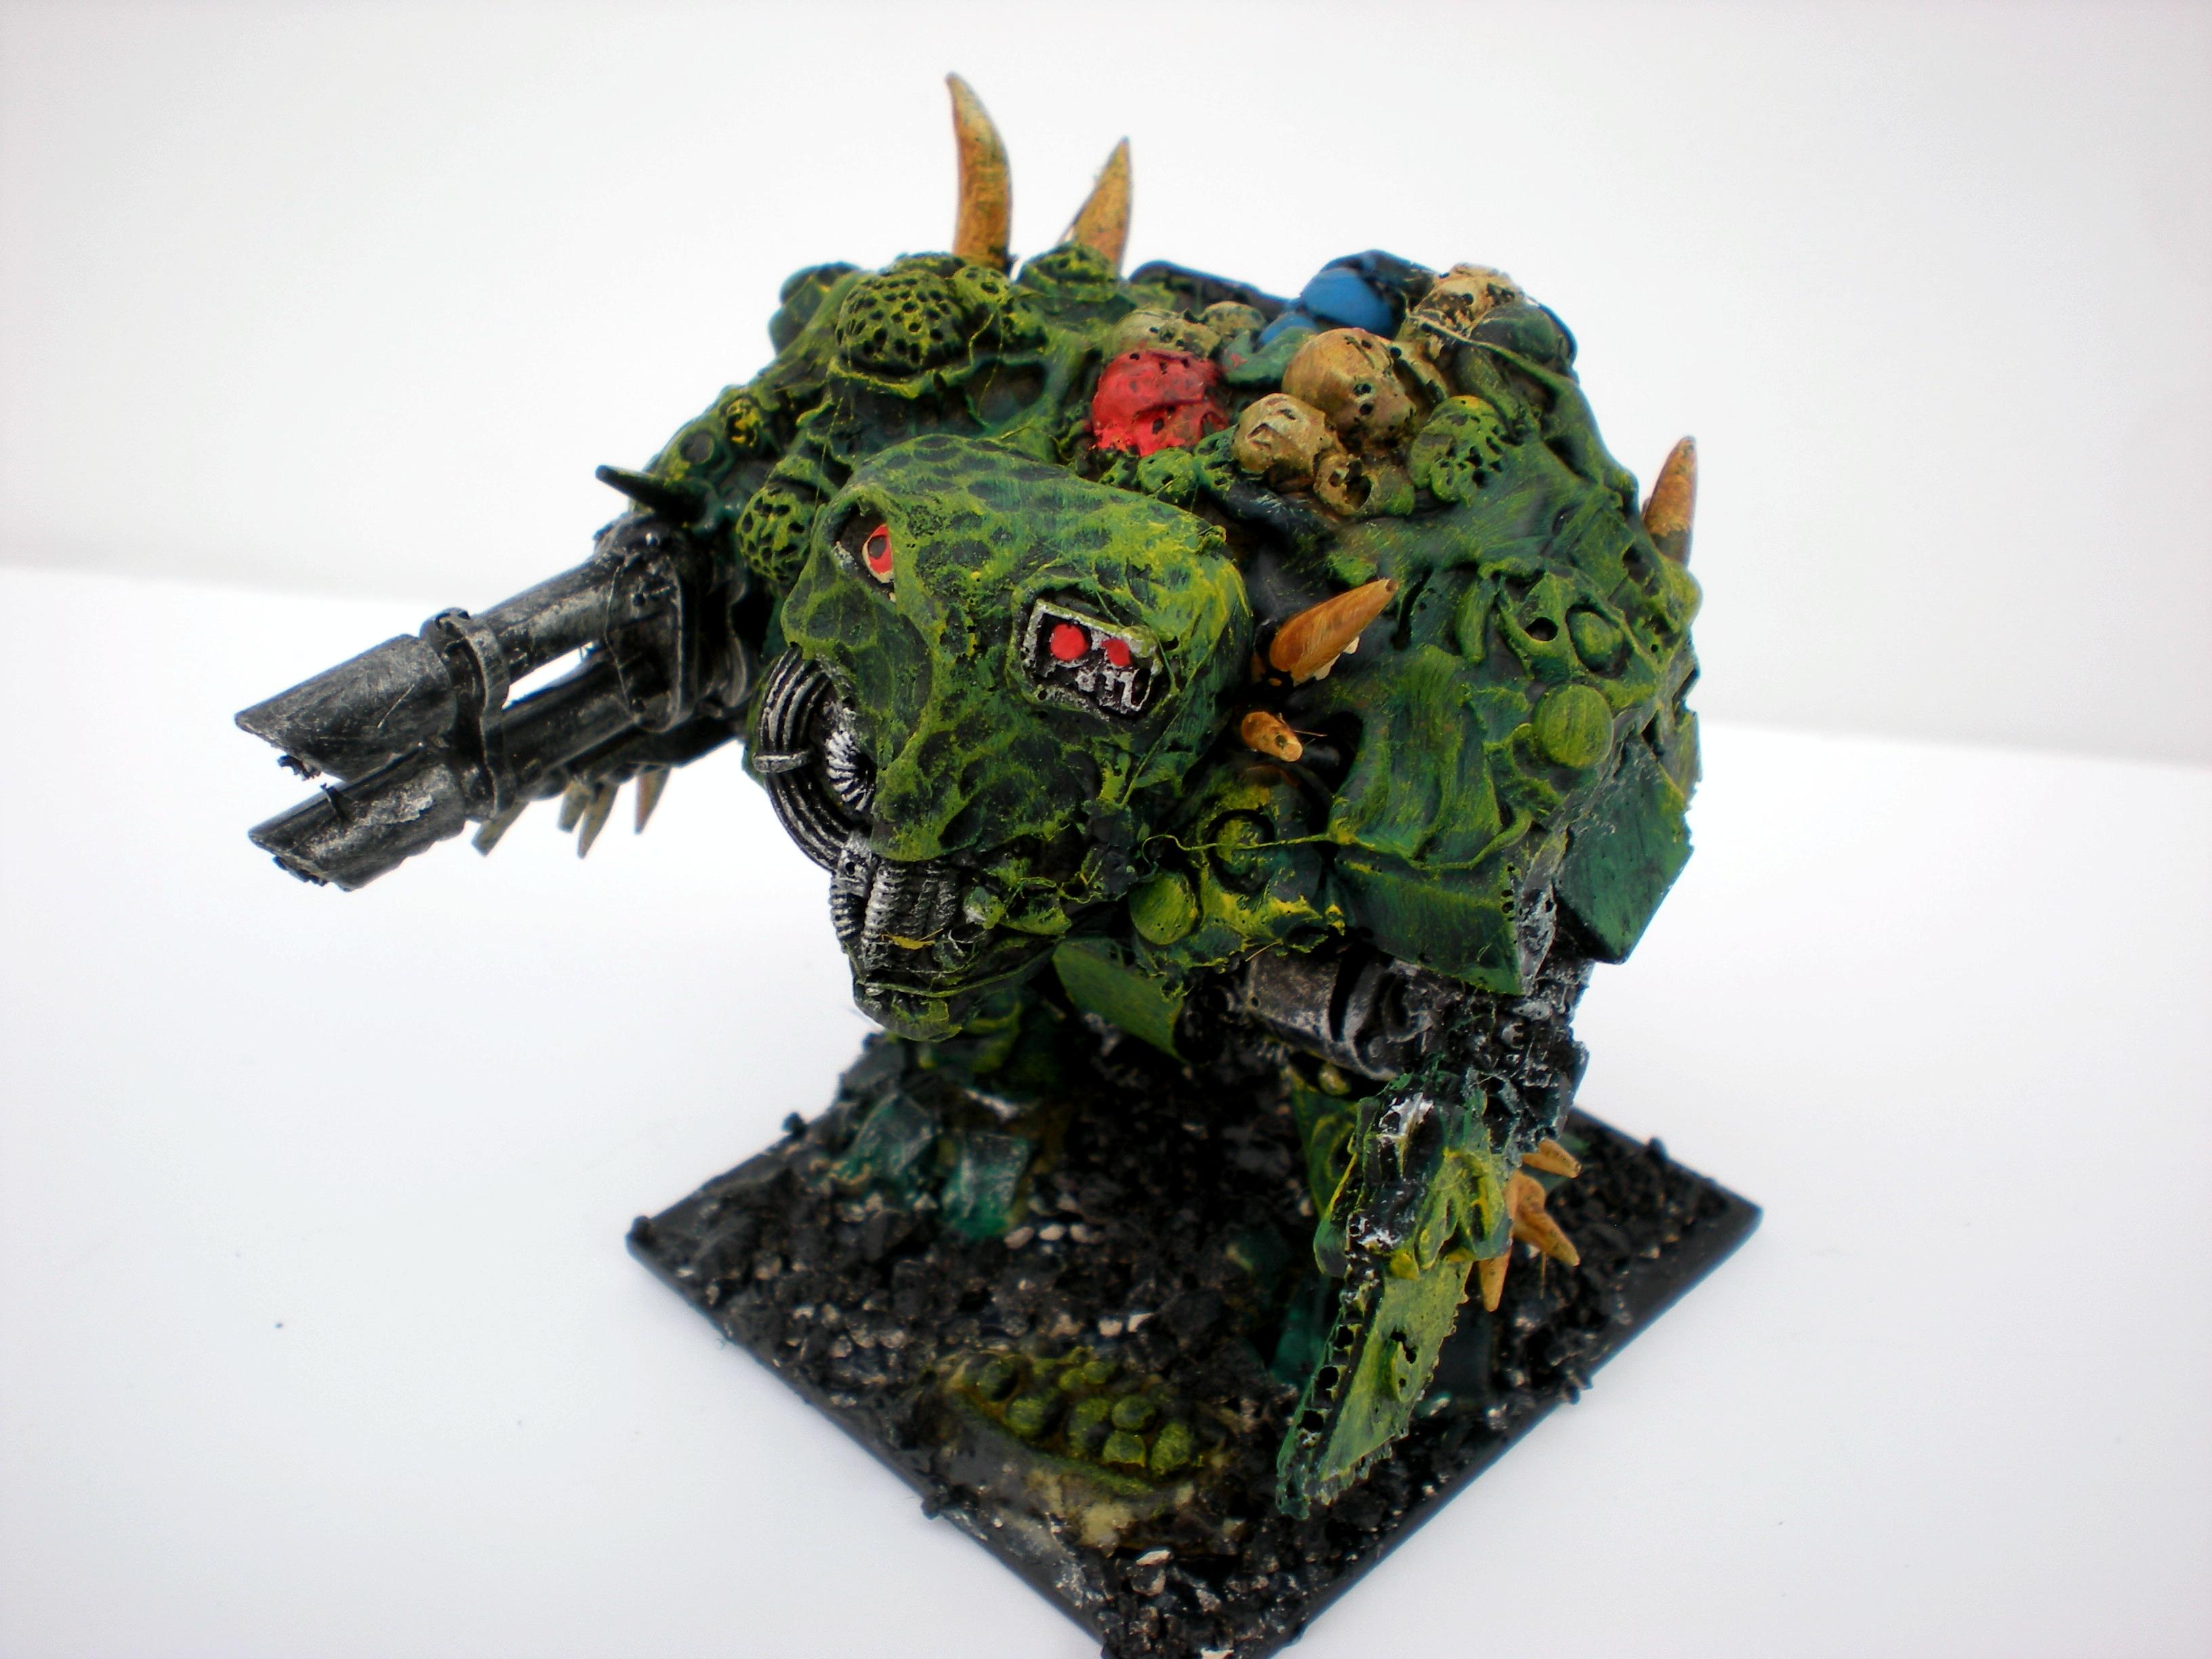 Chaos Space Marines, Dreadnought, Nurgle, Warhammer 40,000